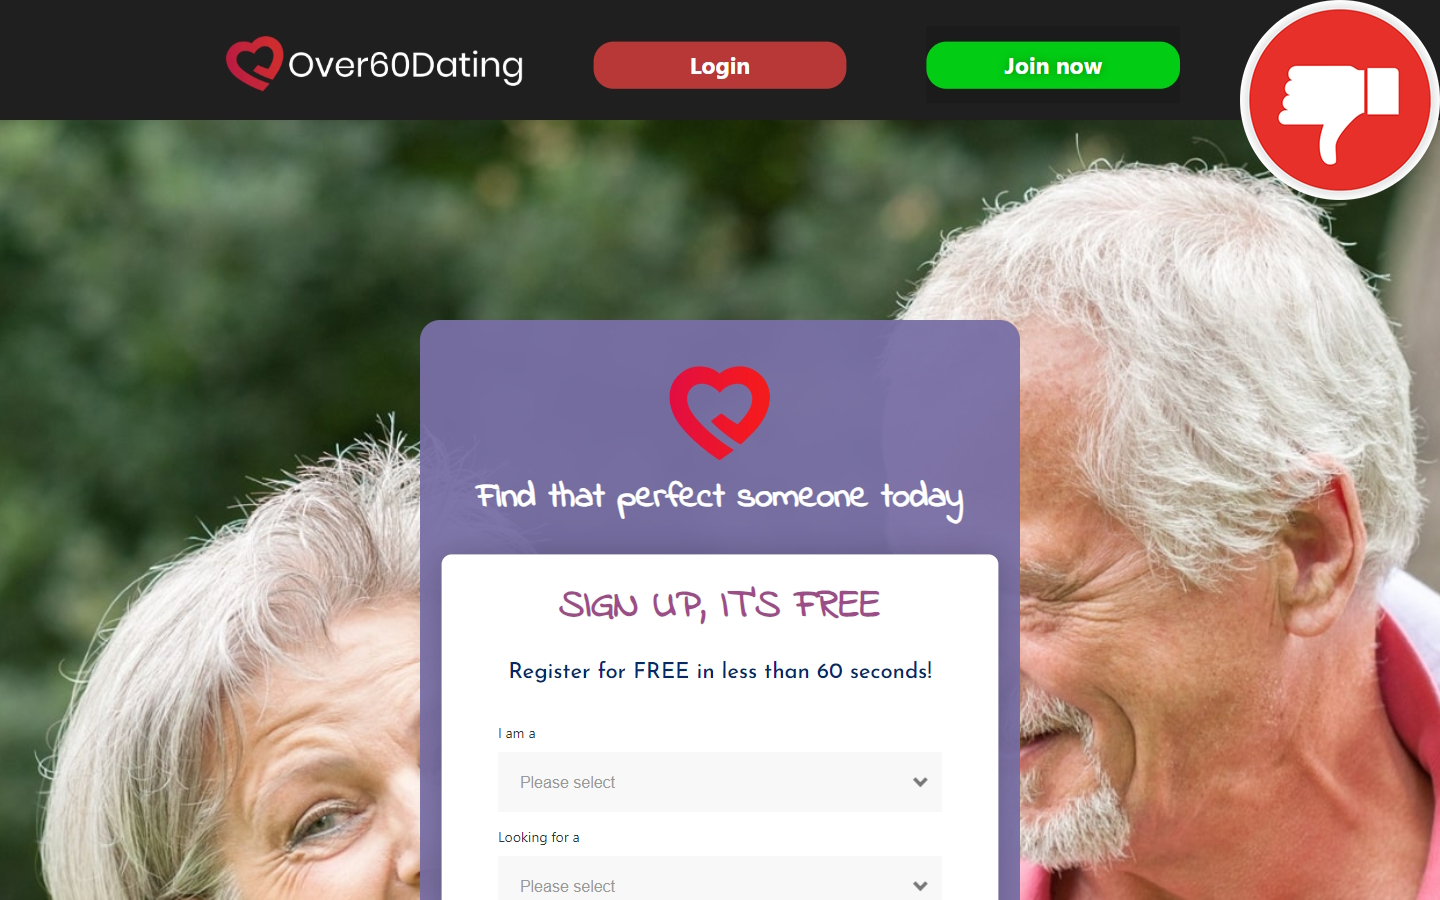 Review Over60DatingSite.co.uk Scam